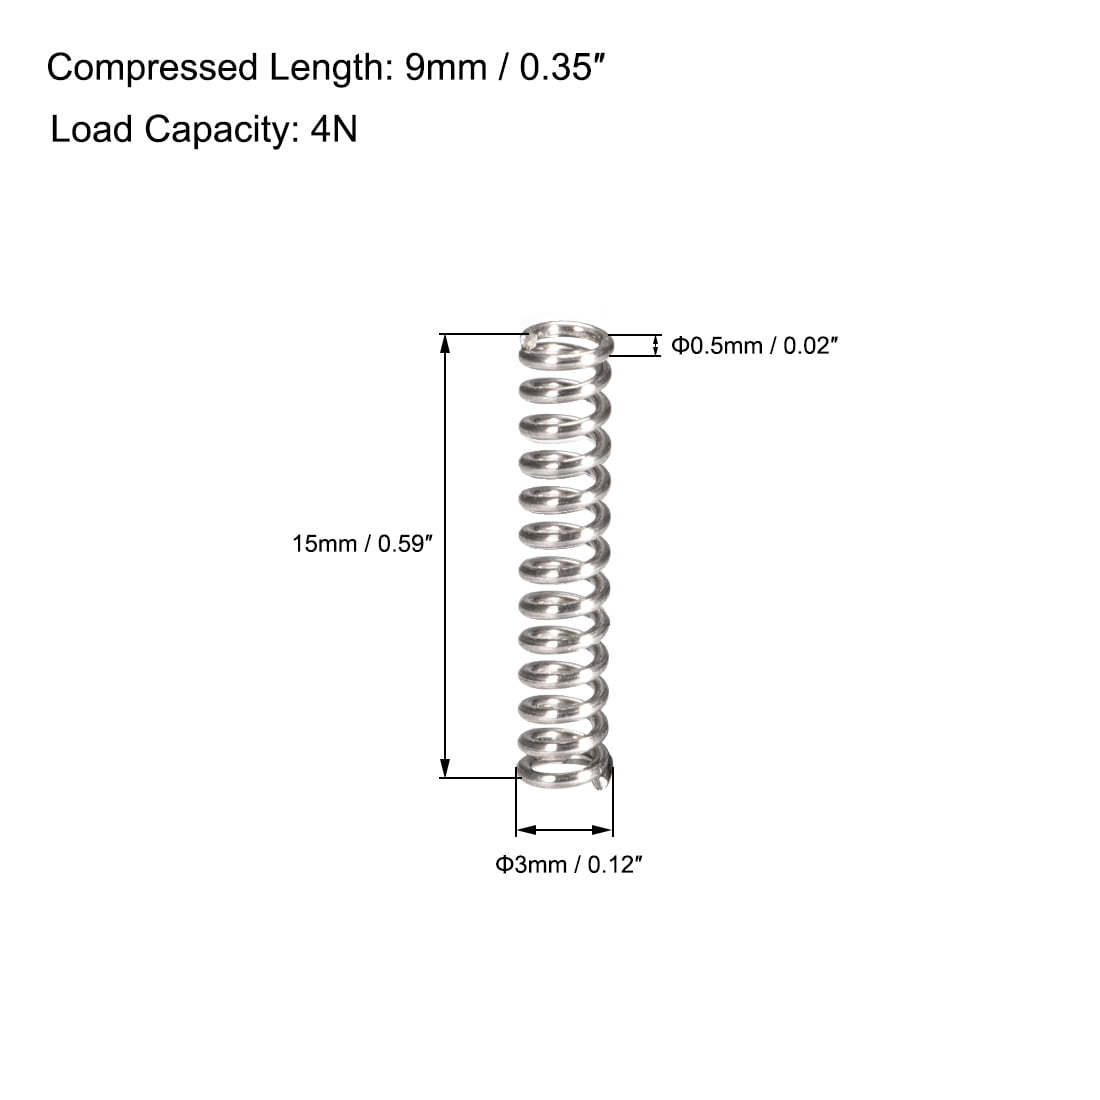 uxcell Compression Spring,304 Stainless Steel,3mm OD,0.5mm Wire Size,12mm Compressed Length,20mm Free Length,4N Load Capacity,Silver Tone,30pcs